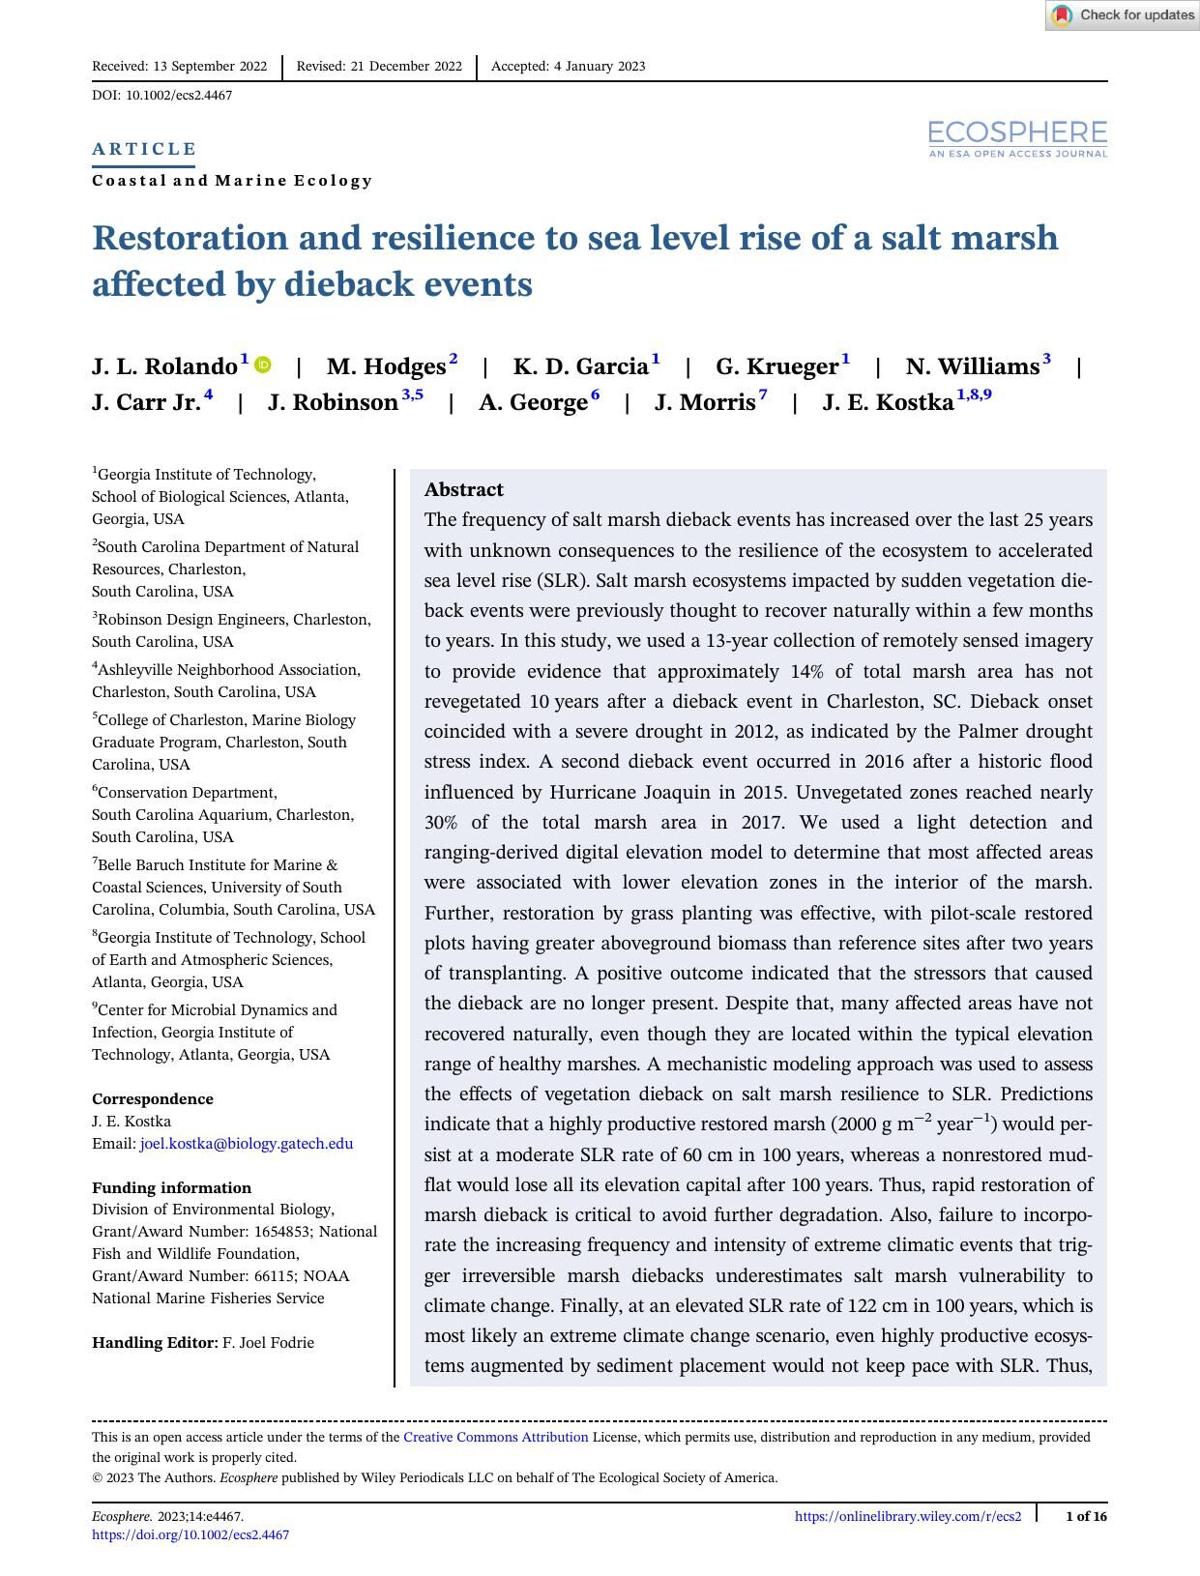 Restoration and resilience to sea level rise of a salt marsh affected by dieback events